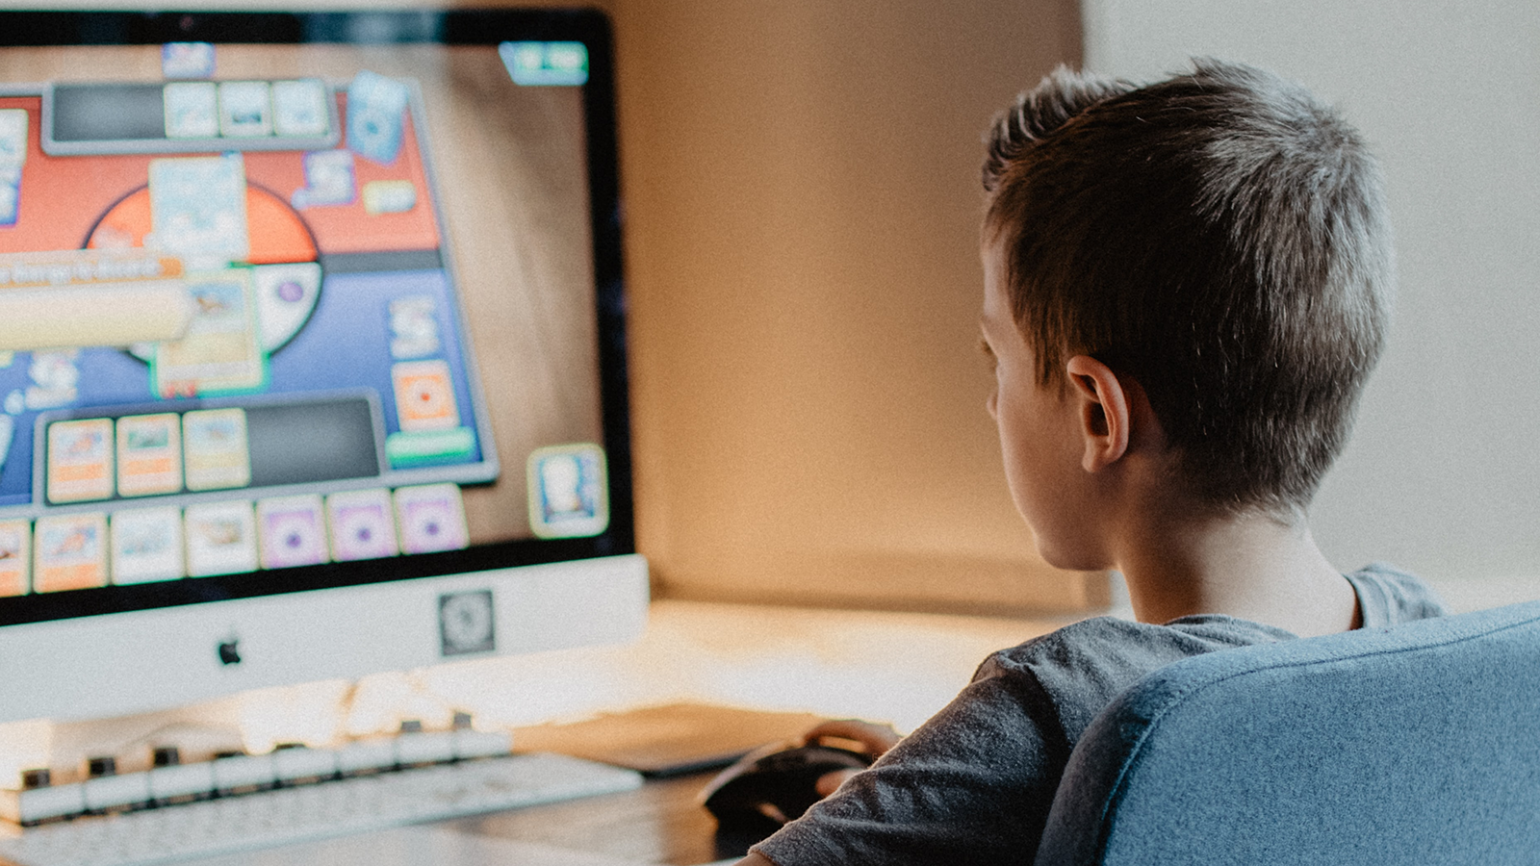 Is your kid a tech wiz or science enthusiast? Here are some camps focused on developing skills and exploring their passions.